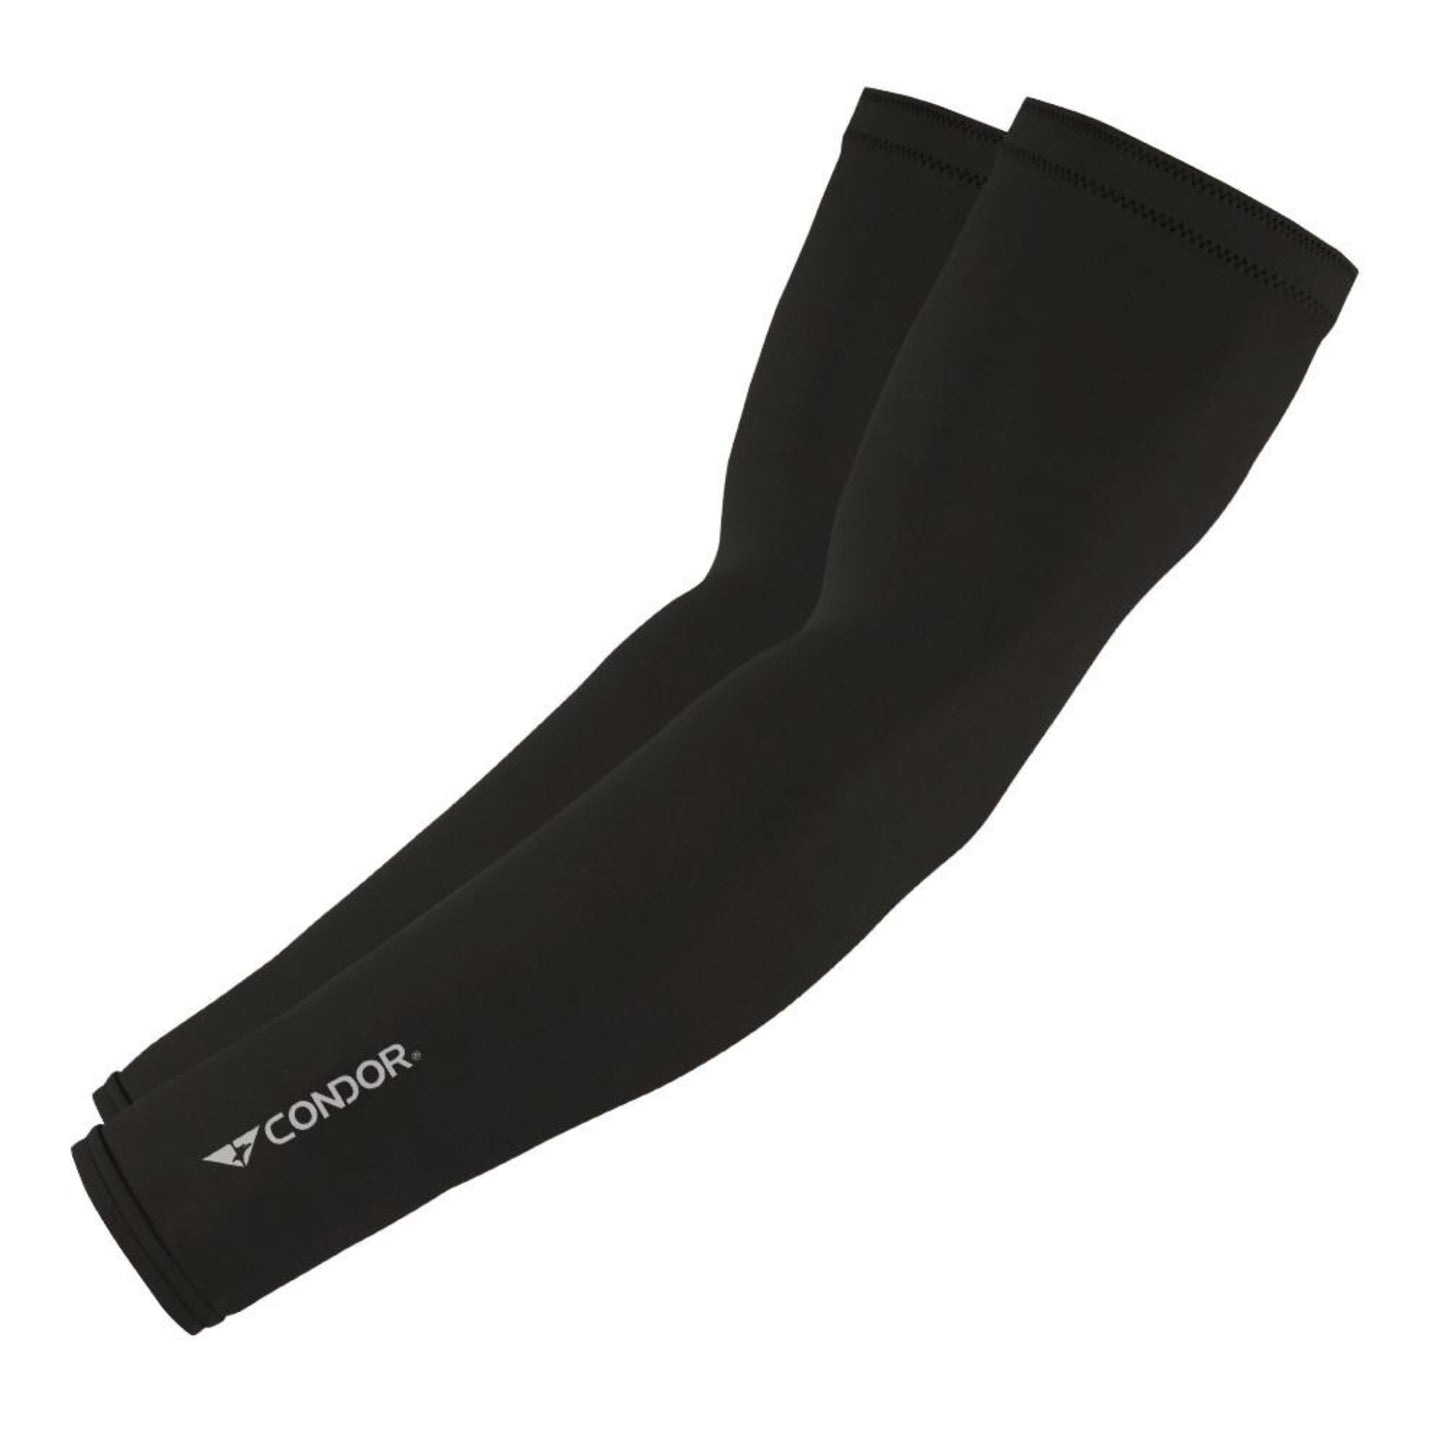 Black compression arm sleeve from Condor Outdoor.